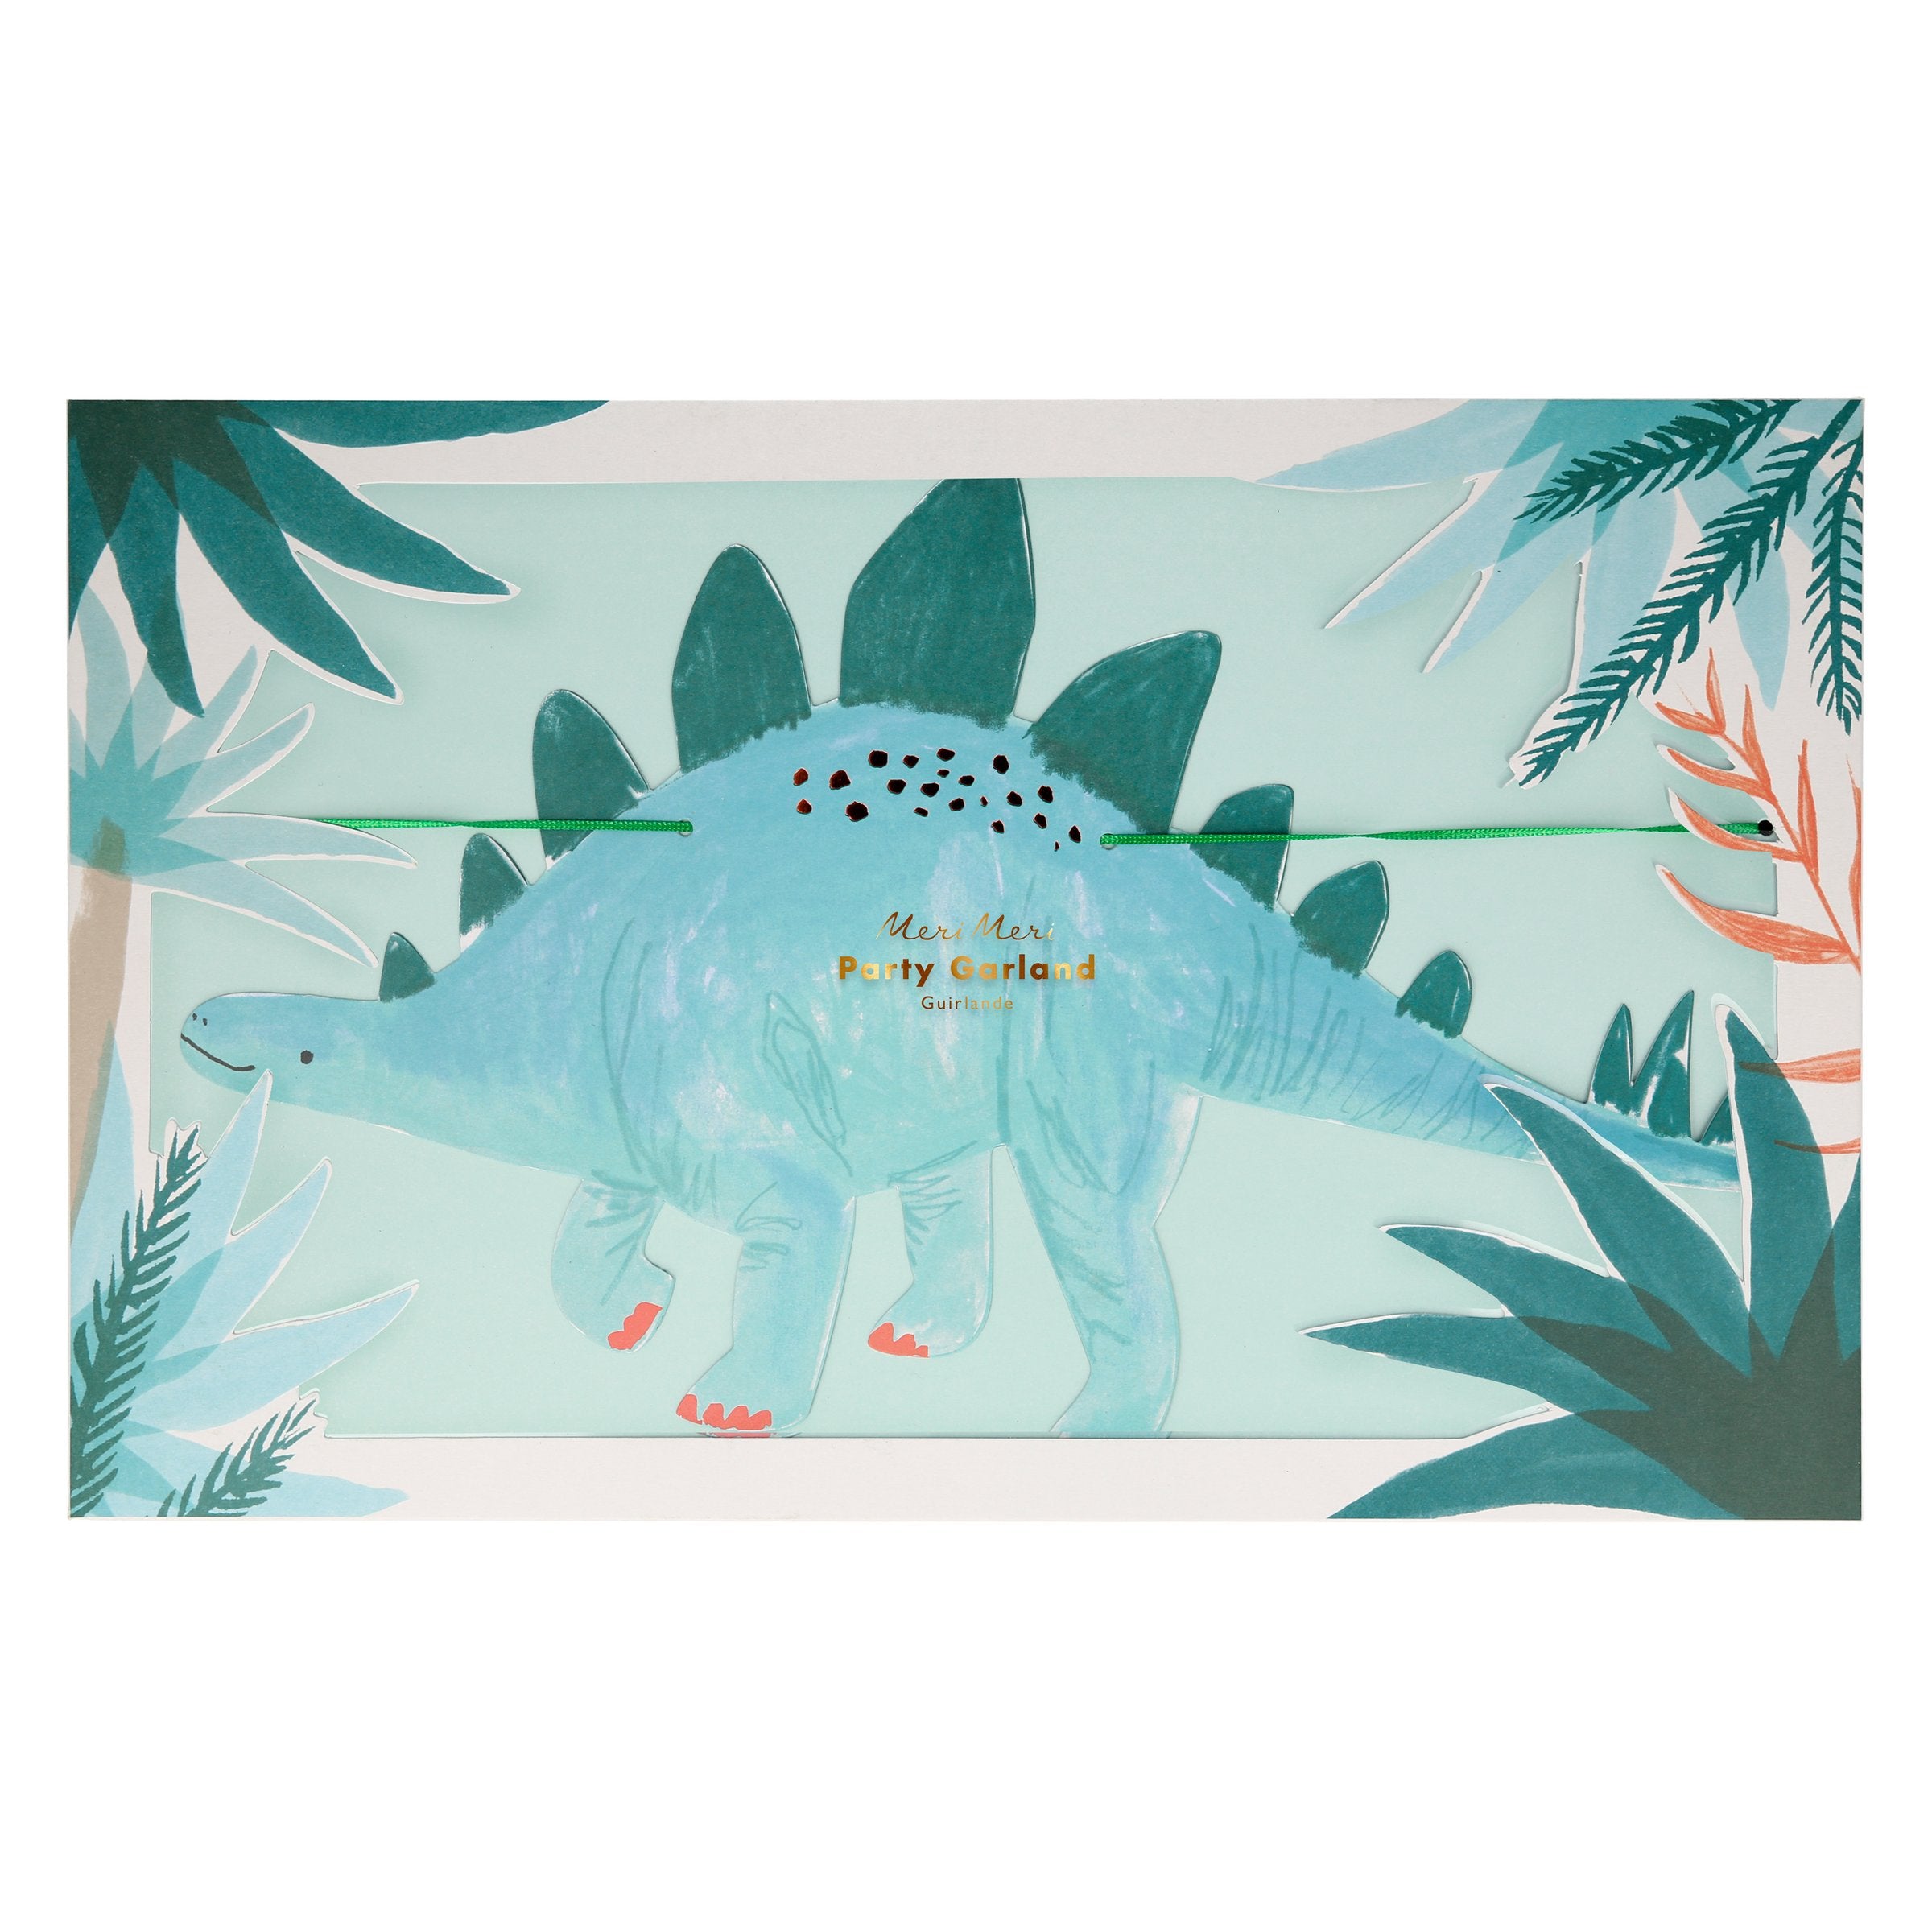 Our large garland, featuring colorful dinosaurs, is perfect for a dinosaur themed party.